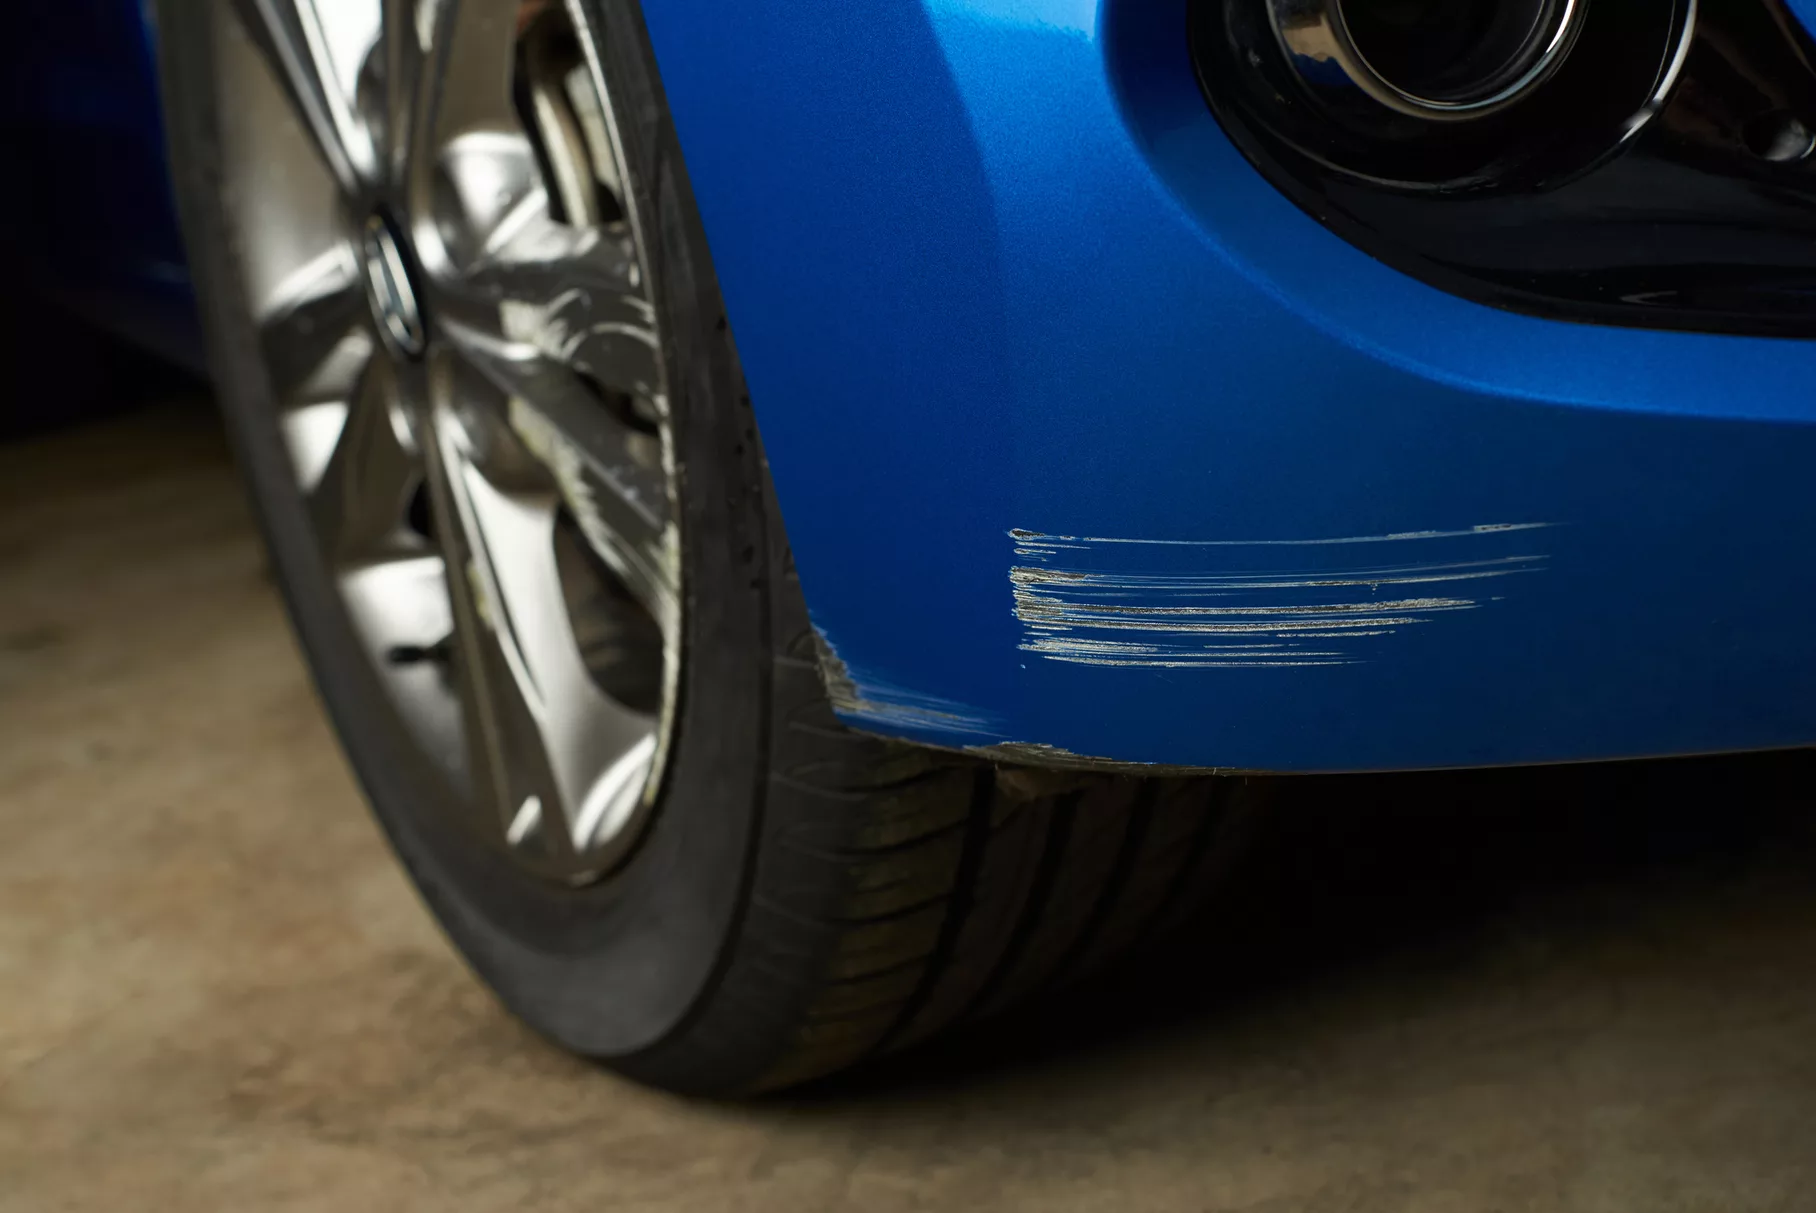 How to Remove Scratches from Your Car's Paint - Fully Restore Your